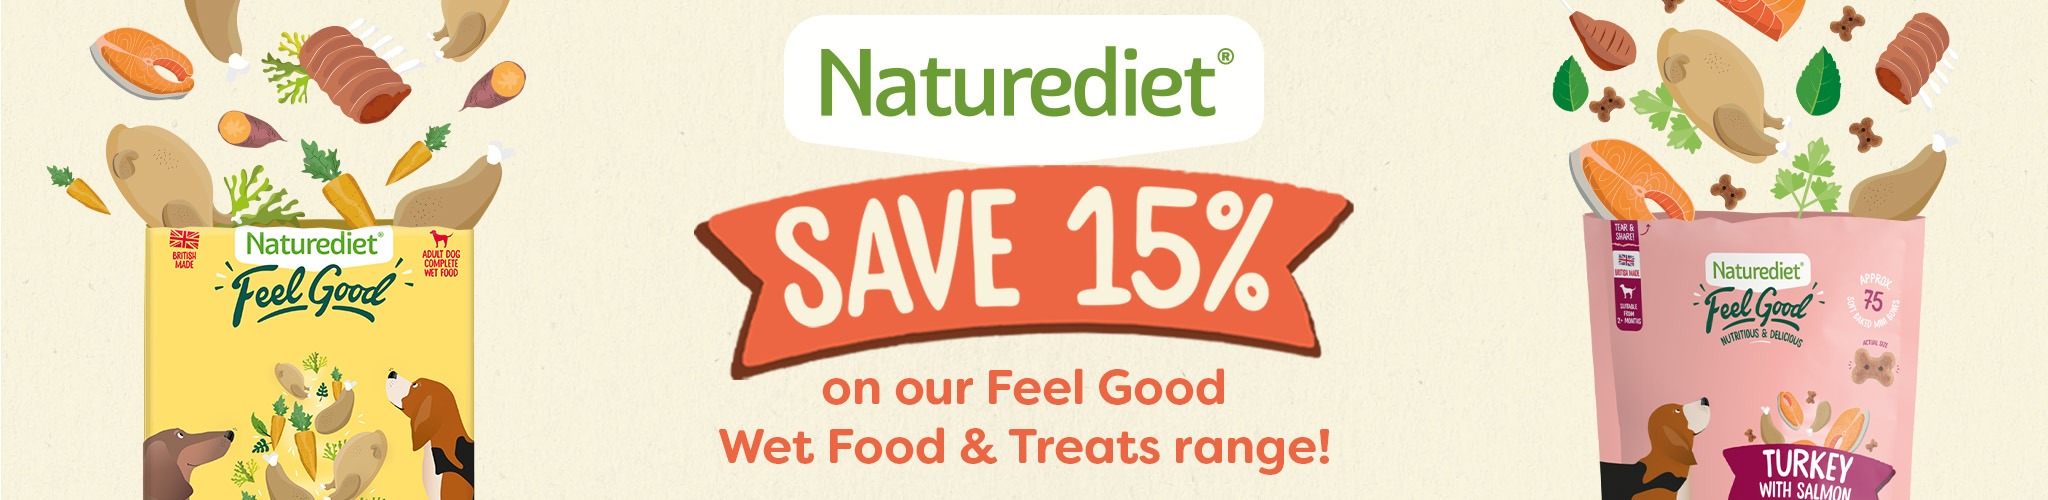 Naturediet May A Dog landing page